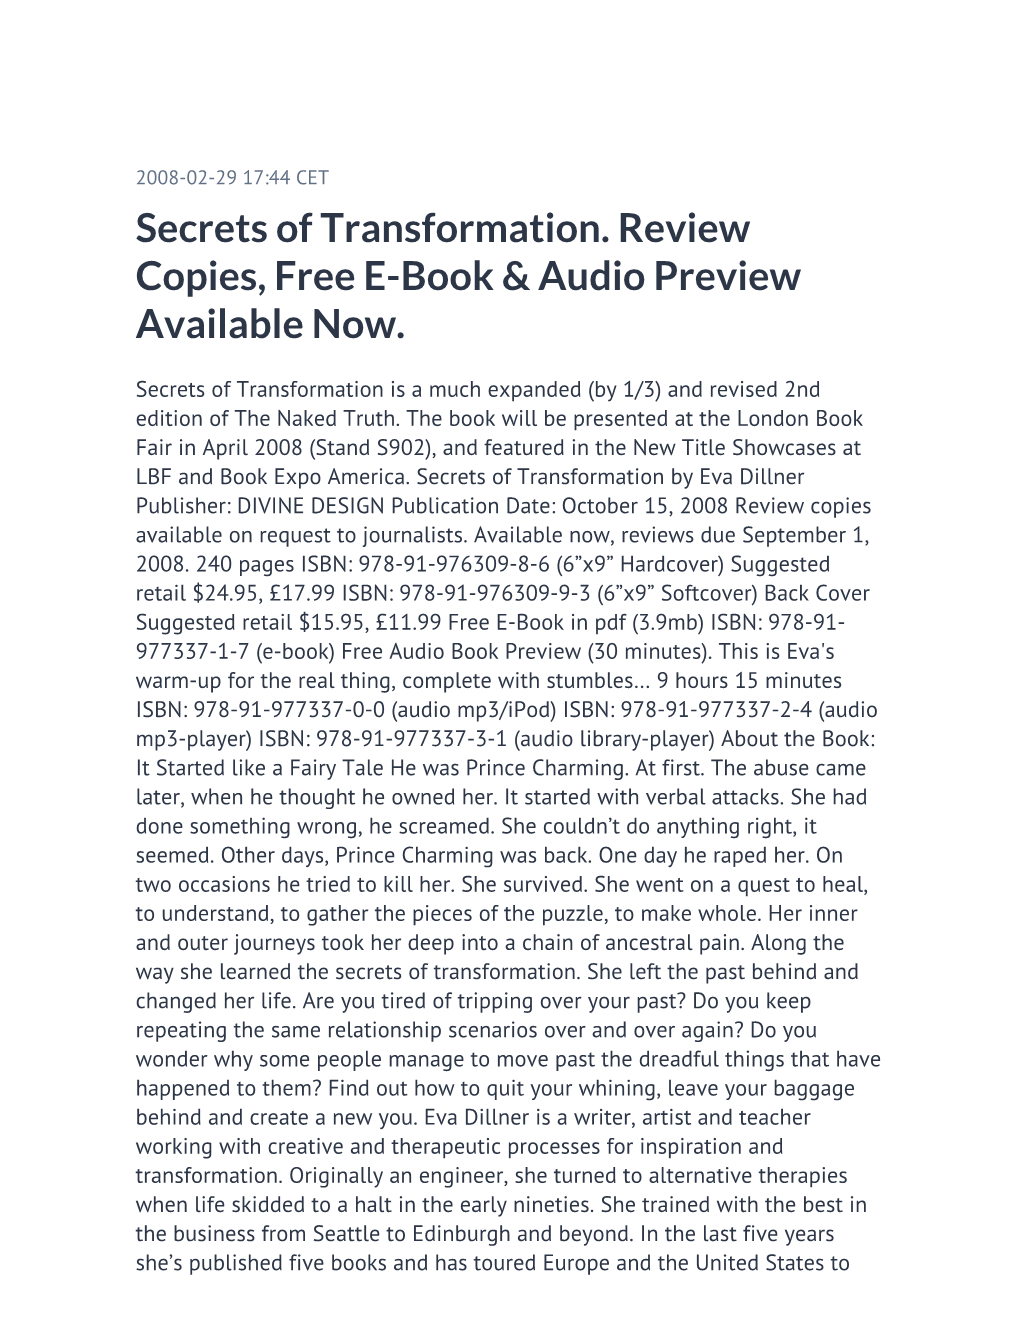 Secrets of Transformation. Review Copies, Free E-Book & Audio Preview Available Now